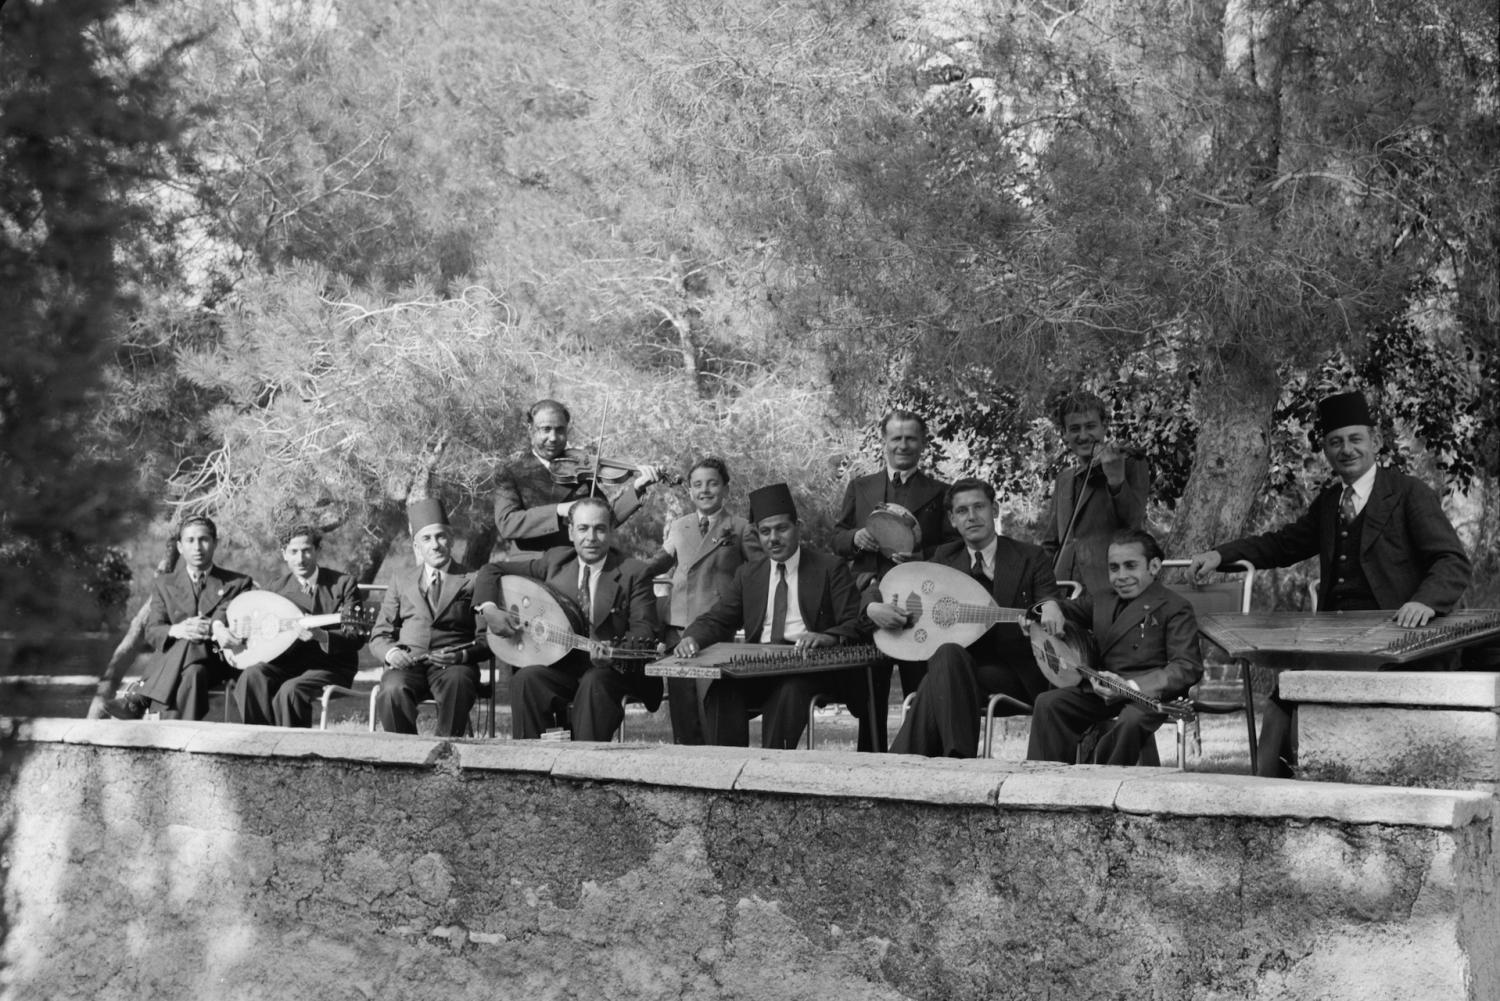 A band in Jerusalem before 1948